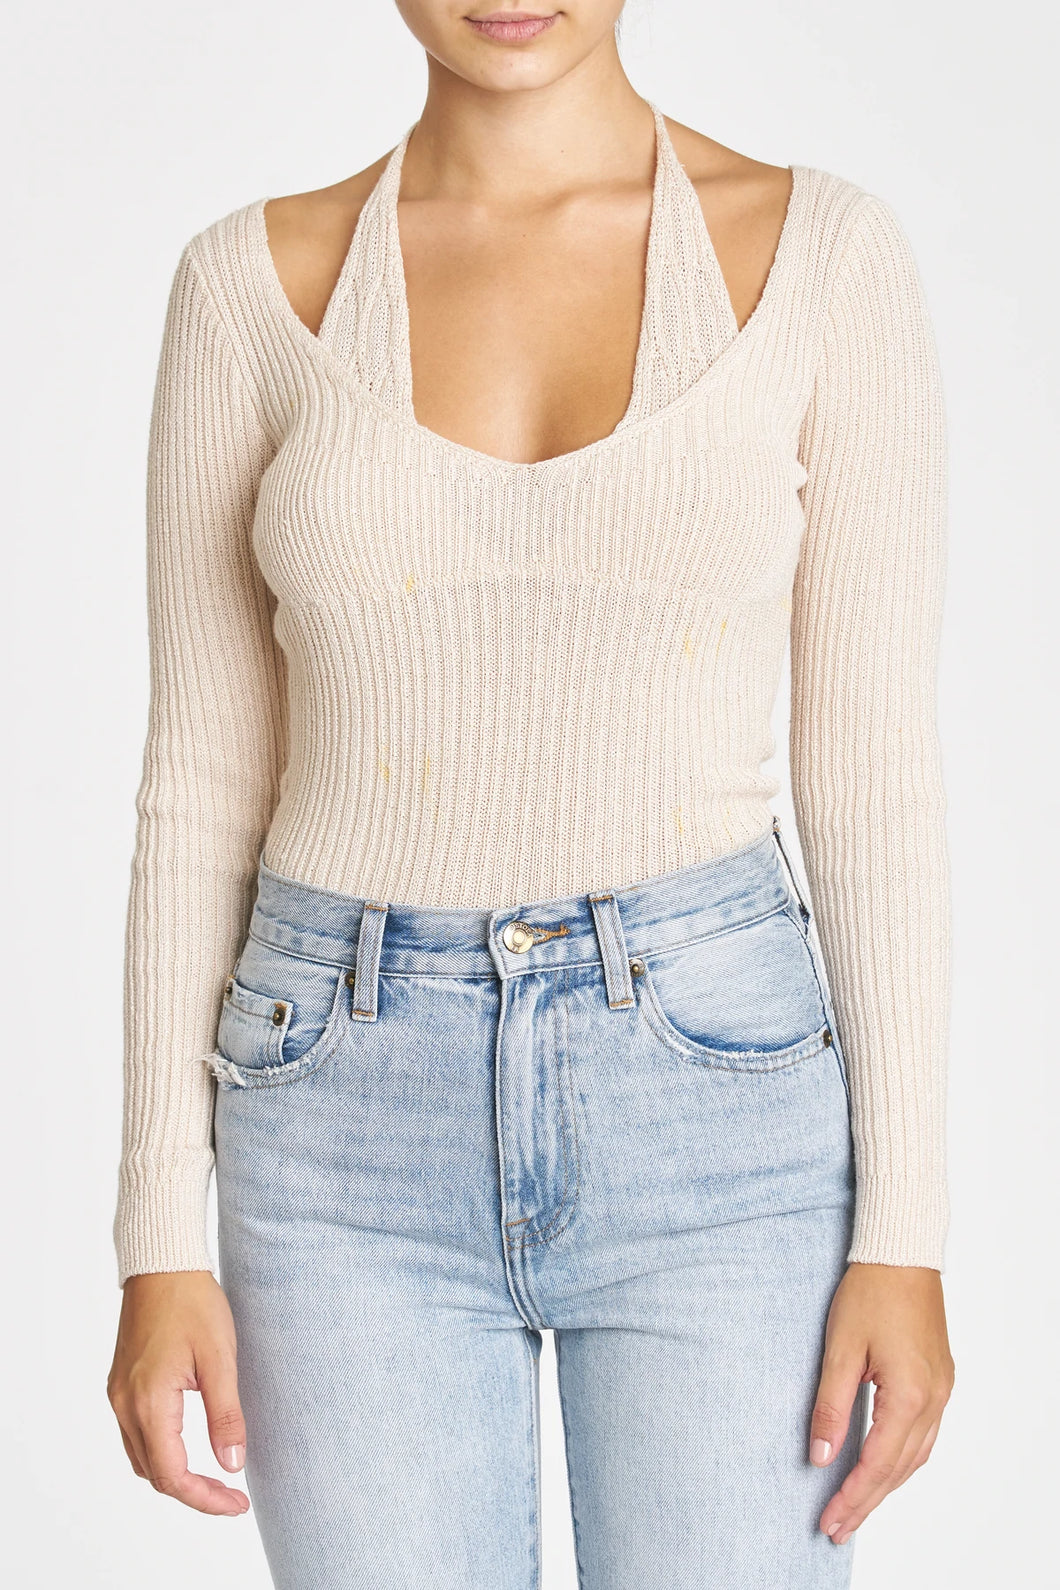 Pistola Camden Halter Two Layer Sweater in Sand Shell - FINAL SALE